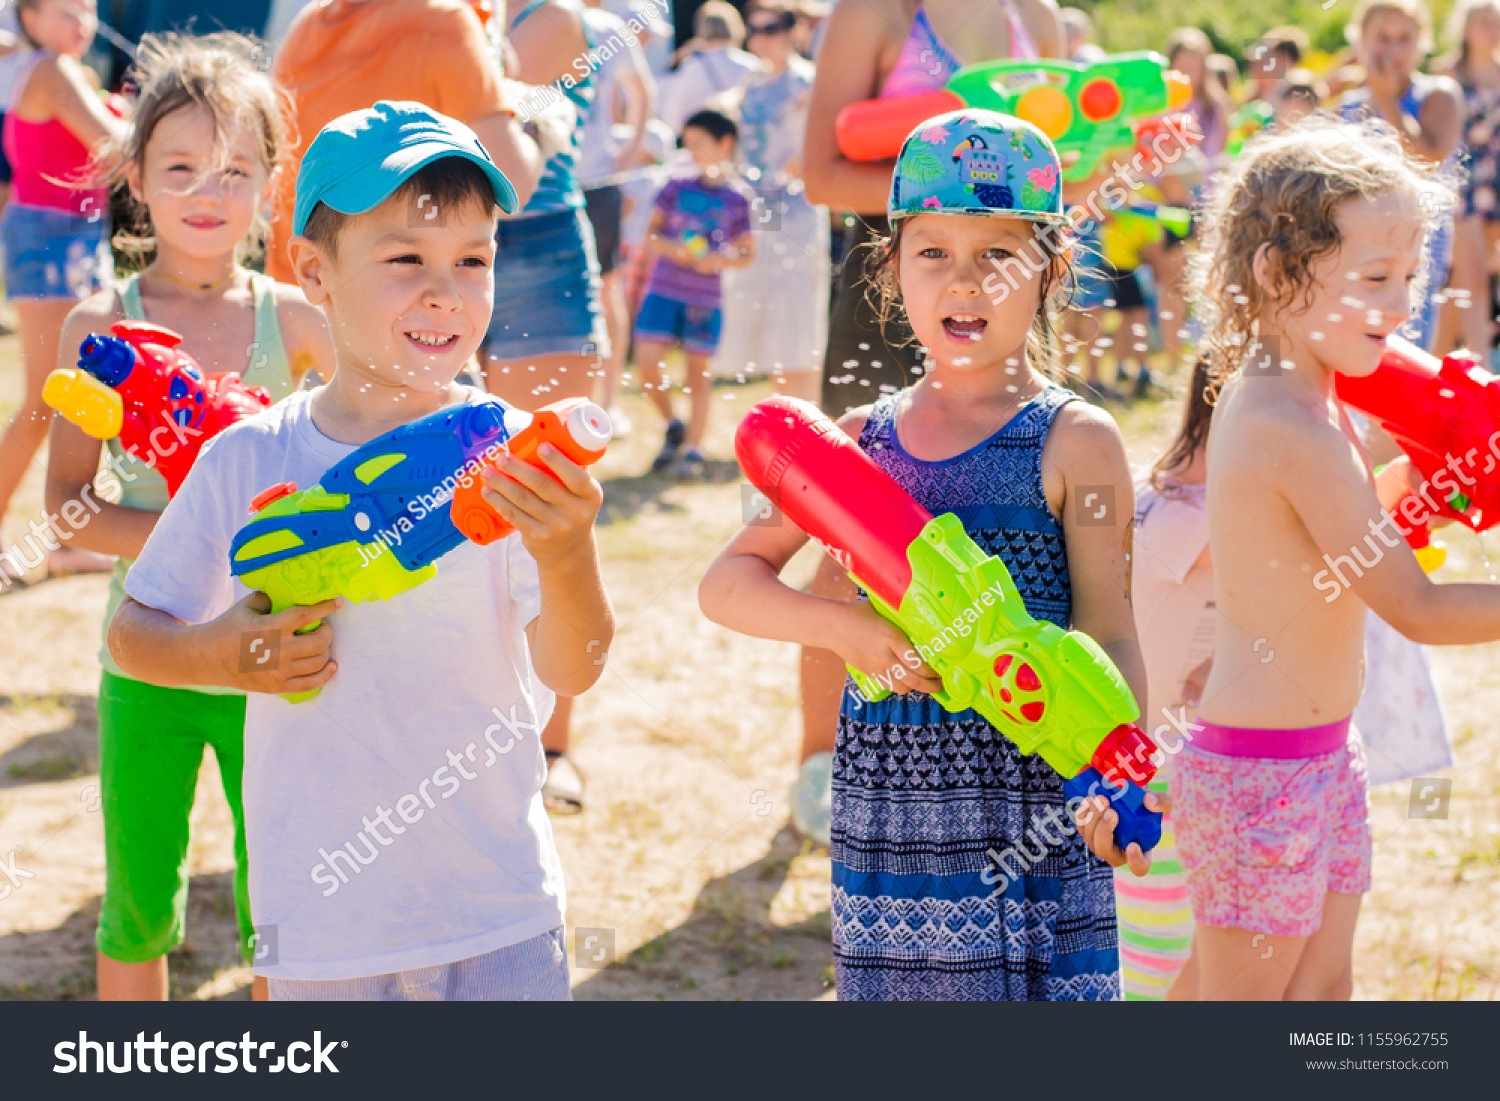 Russia. Moscow. August 11, 2018 Children playing outdoors with water cannons on a beautiful sunny day. Water battle, water game battle #1155962755